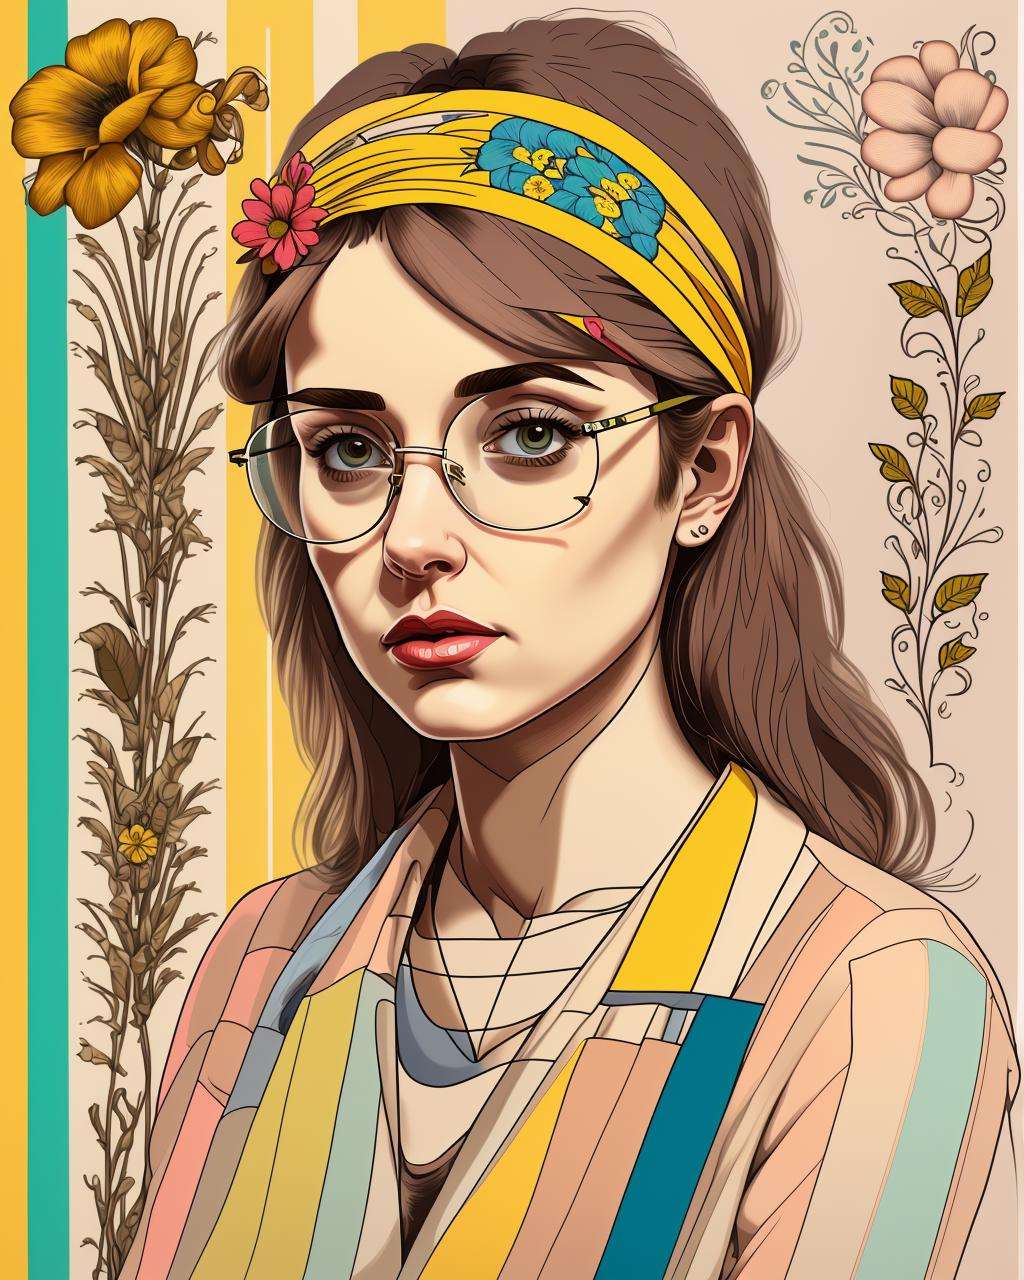 a painting of a woman with glasses and a striped shirt with a flower pattern on it and a yellow headband, Annabel Kidston, art nouveau fashion embroidered, a pop art painting, feminist art, Drew Tucker, digital illustration, digital art, digital art